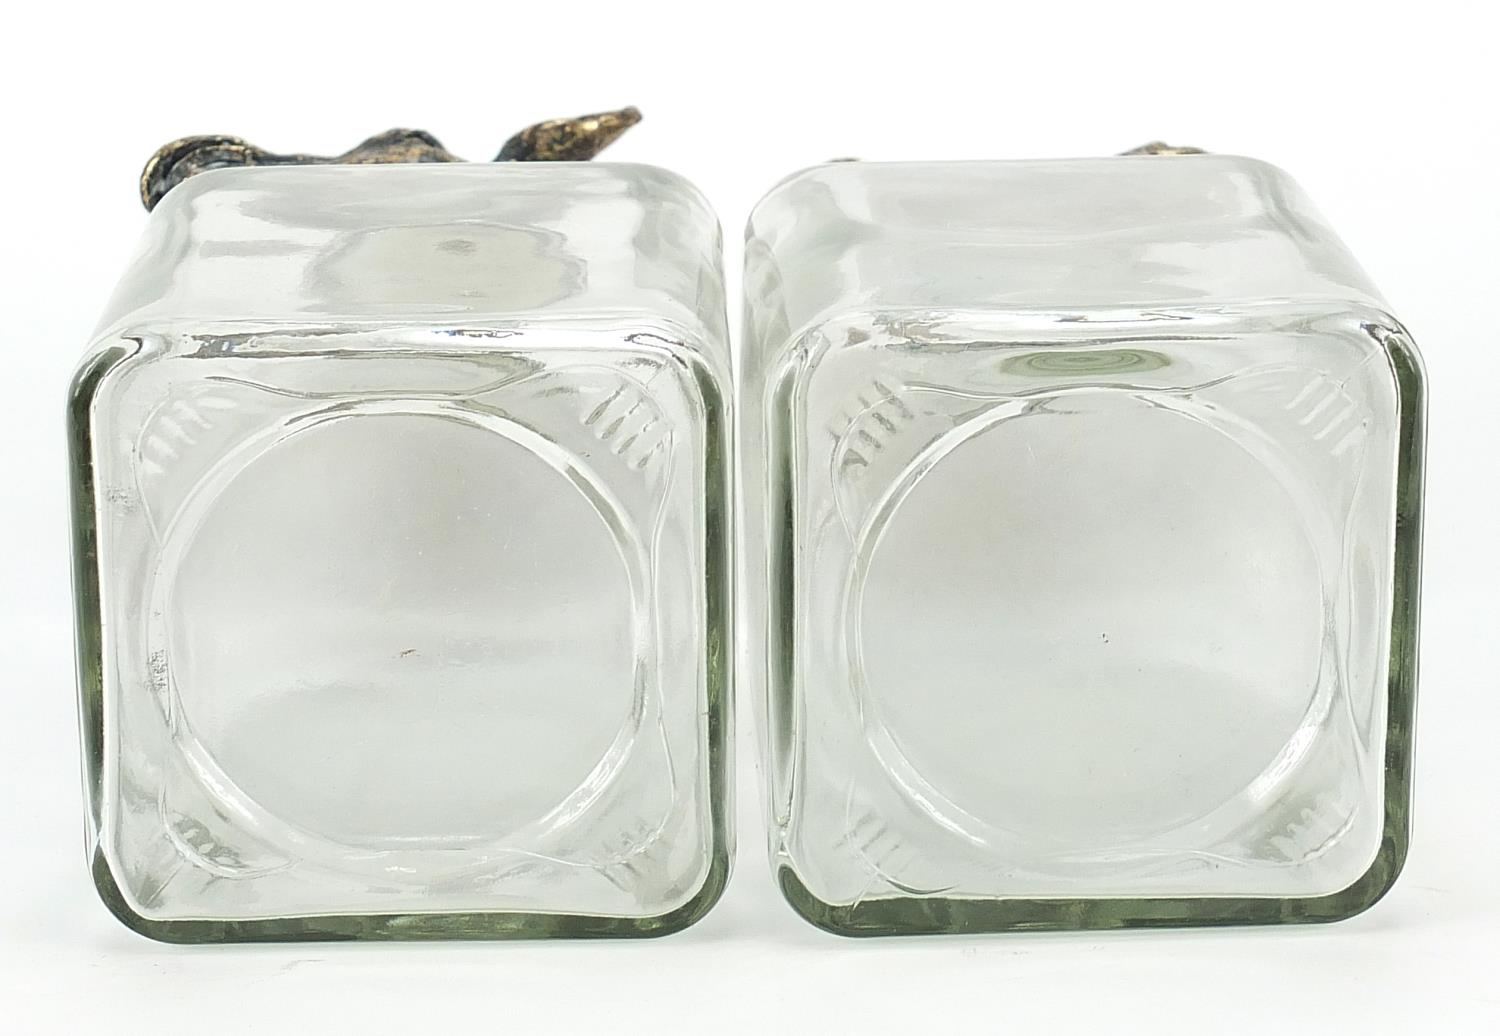 Pair of glass decanters with bronzed rhinoceros and giraffe head stoppers, the largest 24.5cm high - Image 3 of 3